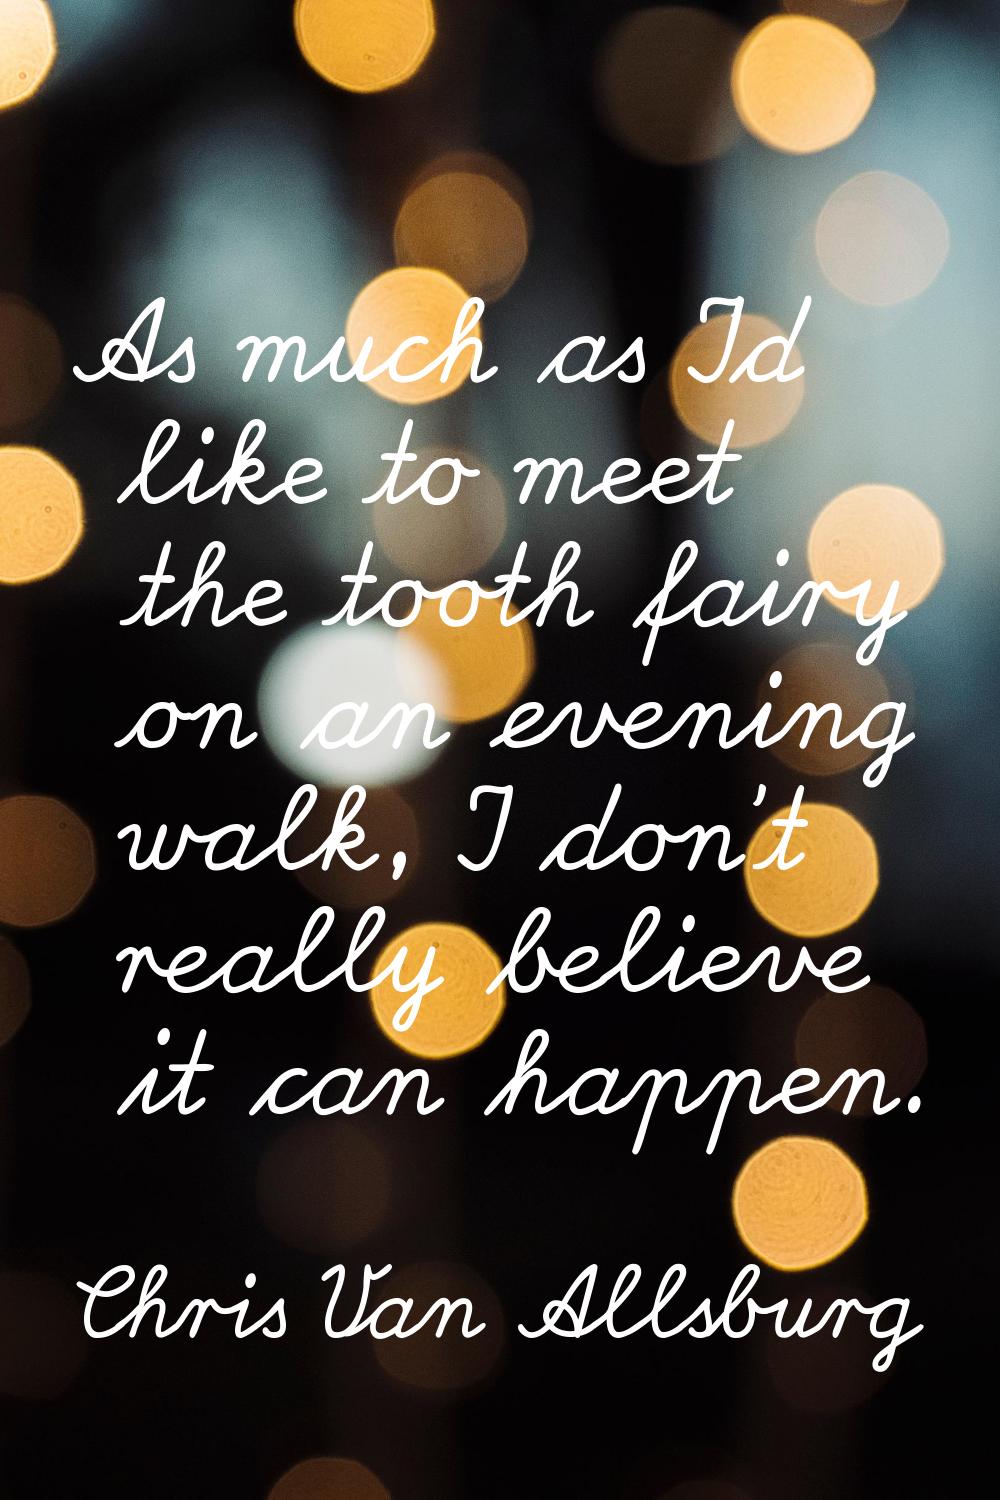 As much as I'd like to meet the tooth fairy on an evening walk, I don't really believe it can happe